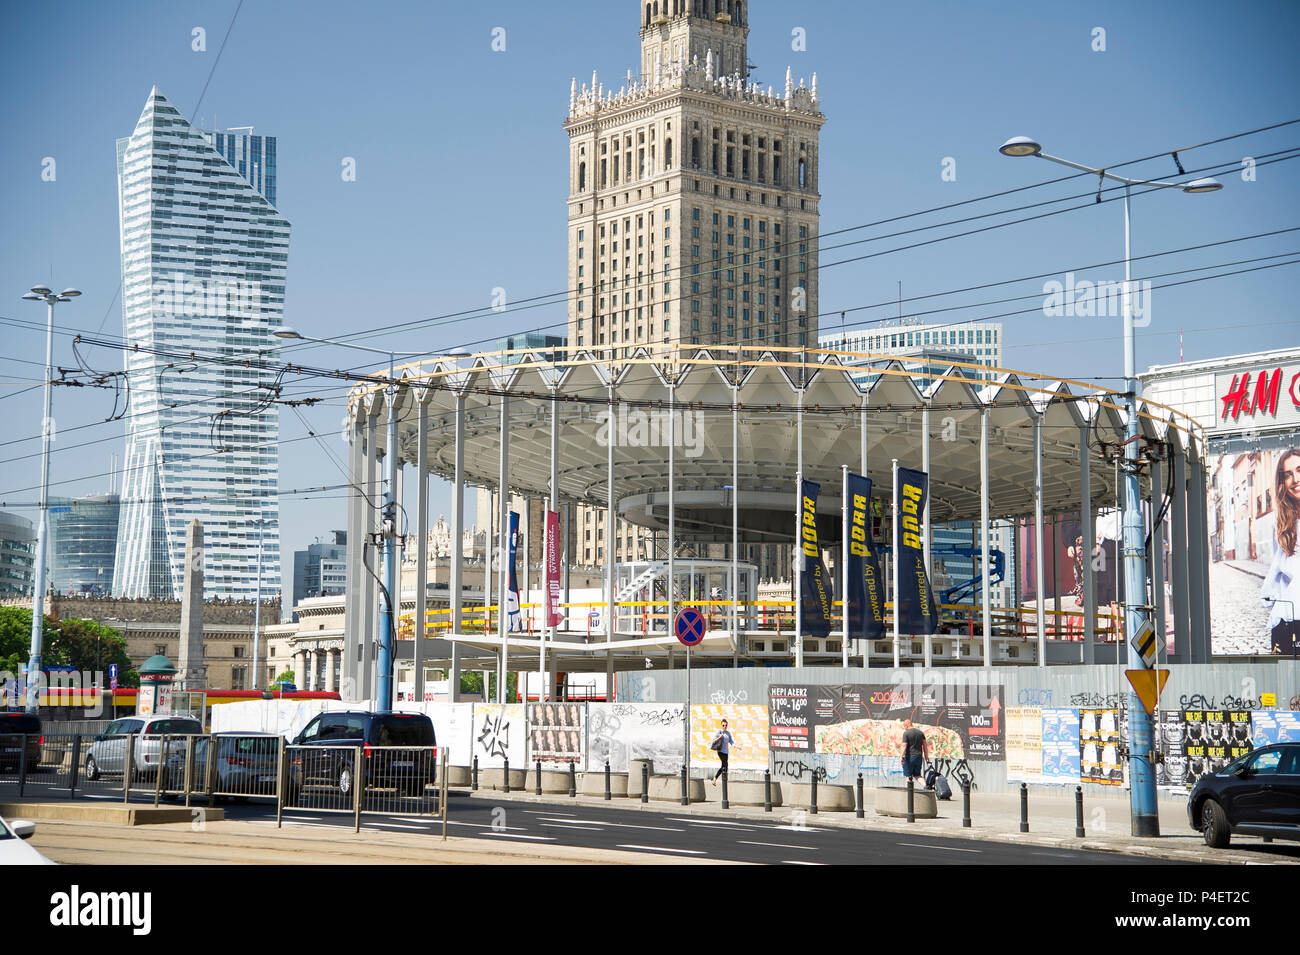 192 meter Zlota 44 residential skyscraper, 237 meter Palac Kultury i Nauki PKiN (Palace of Culture and Science) and Rotunda PKO under construction in  Stock Photo